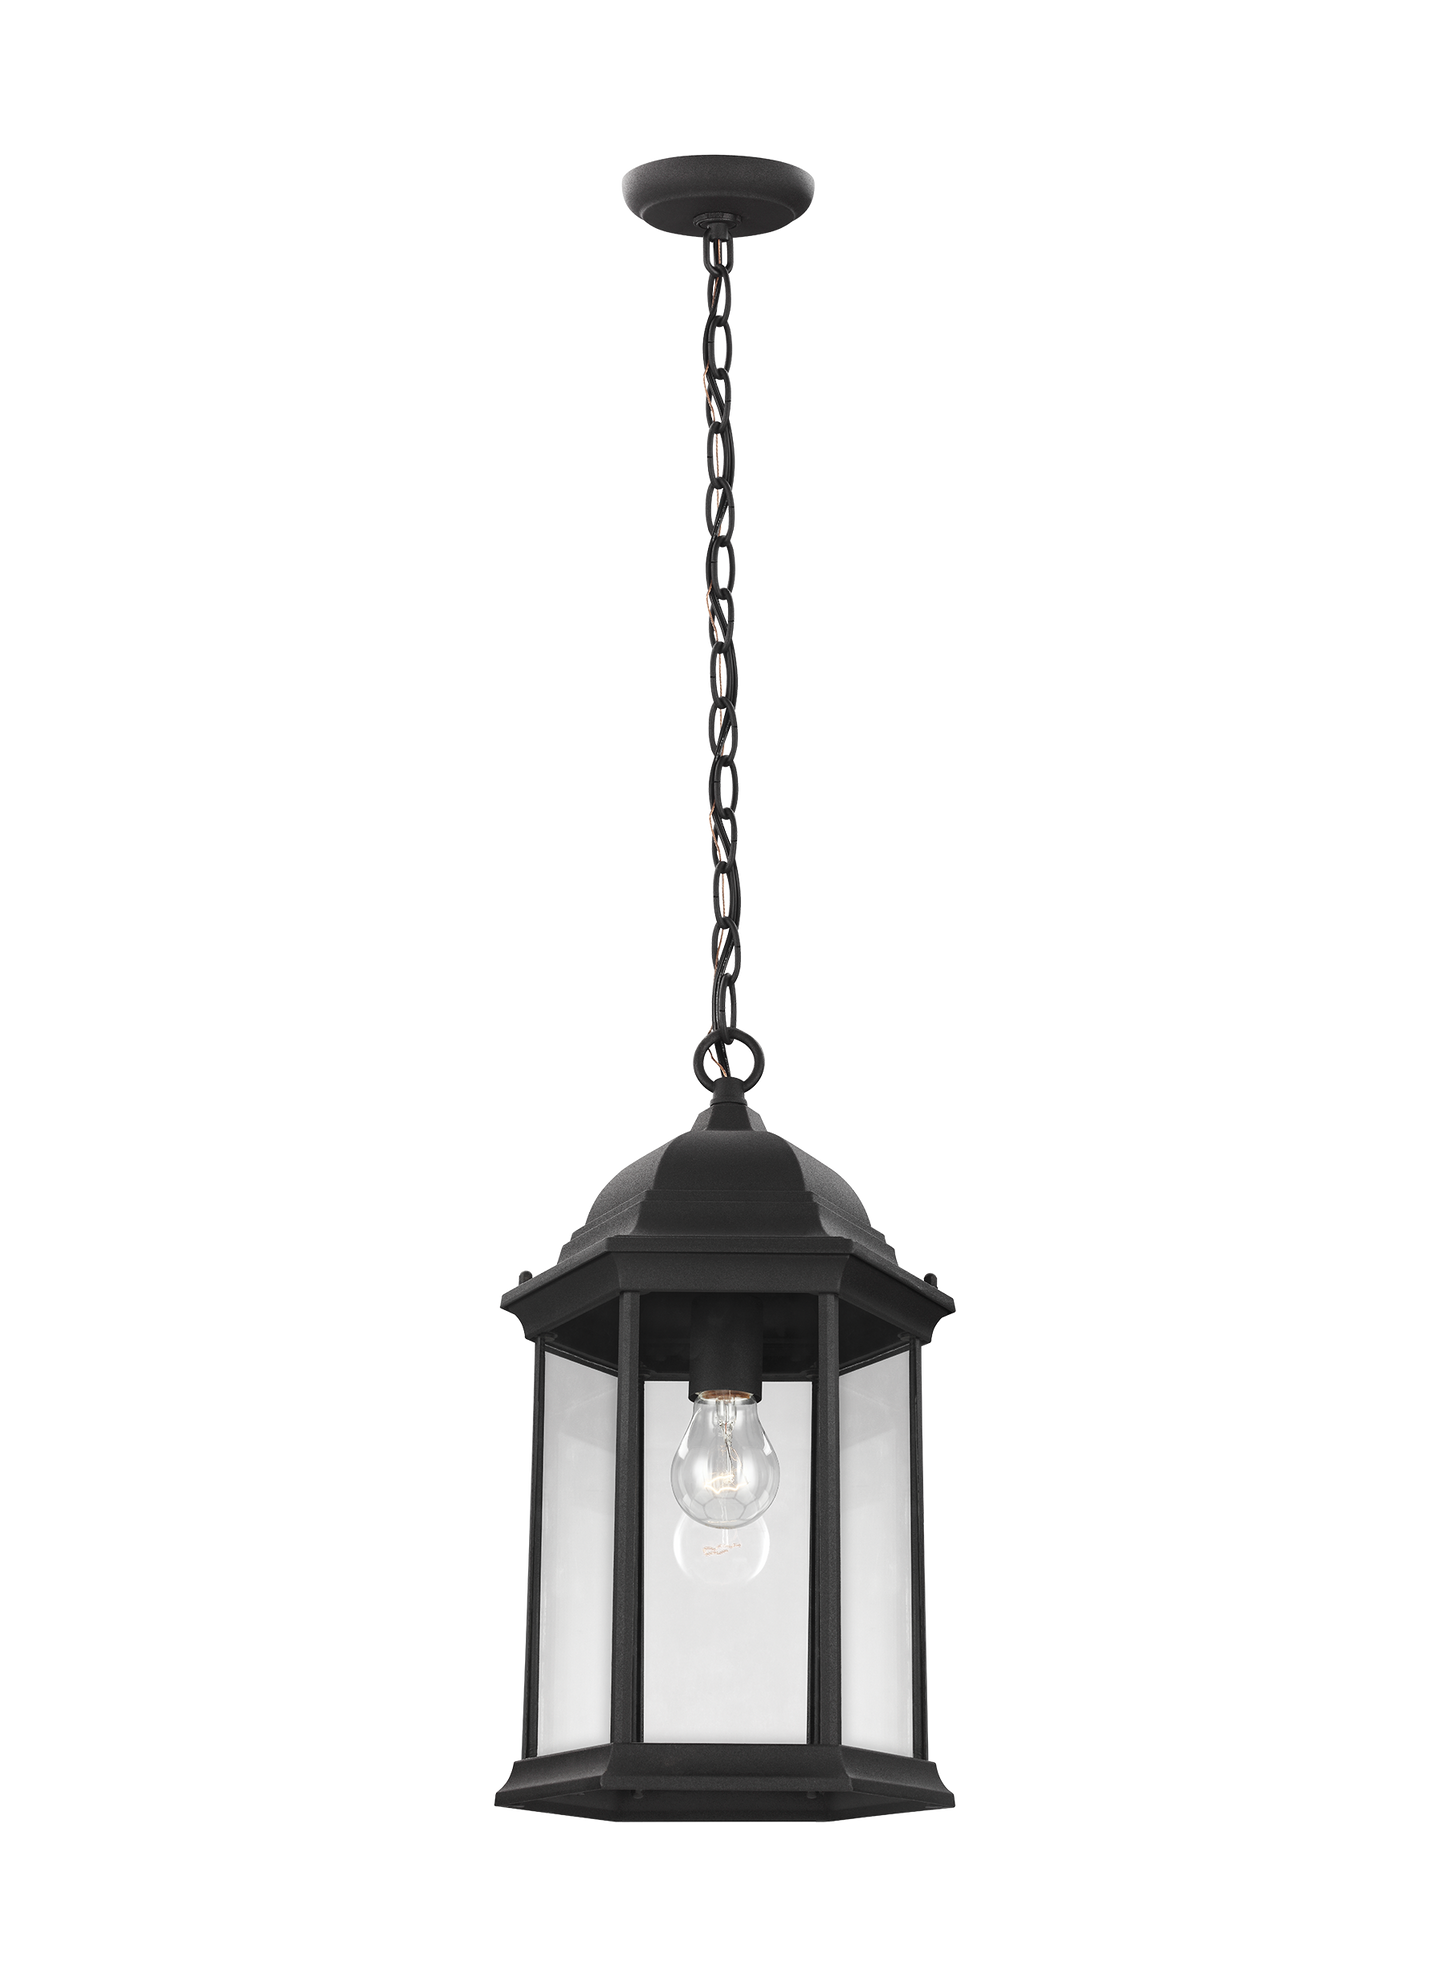 Sevier traditional 1-light outdoor exterior ceiling hanging pendant in black finish with clear glass panels